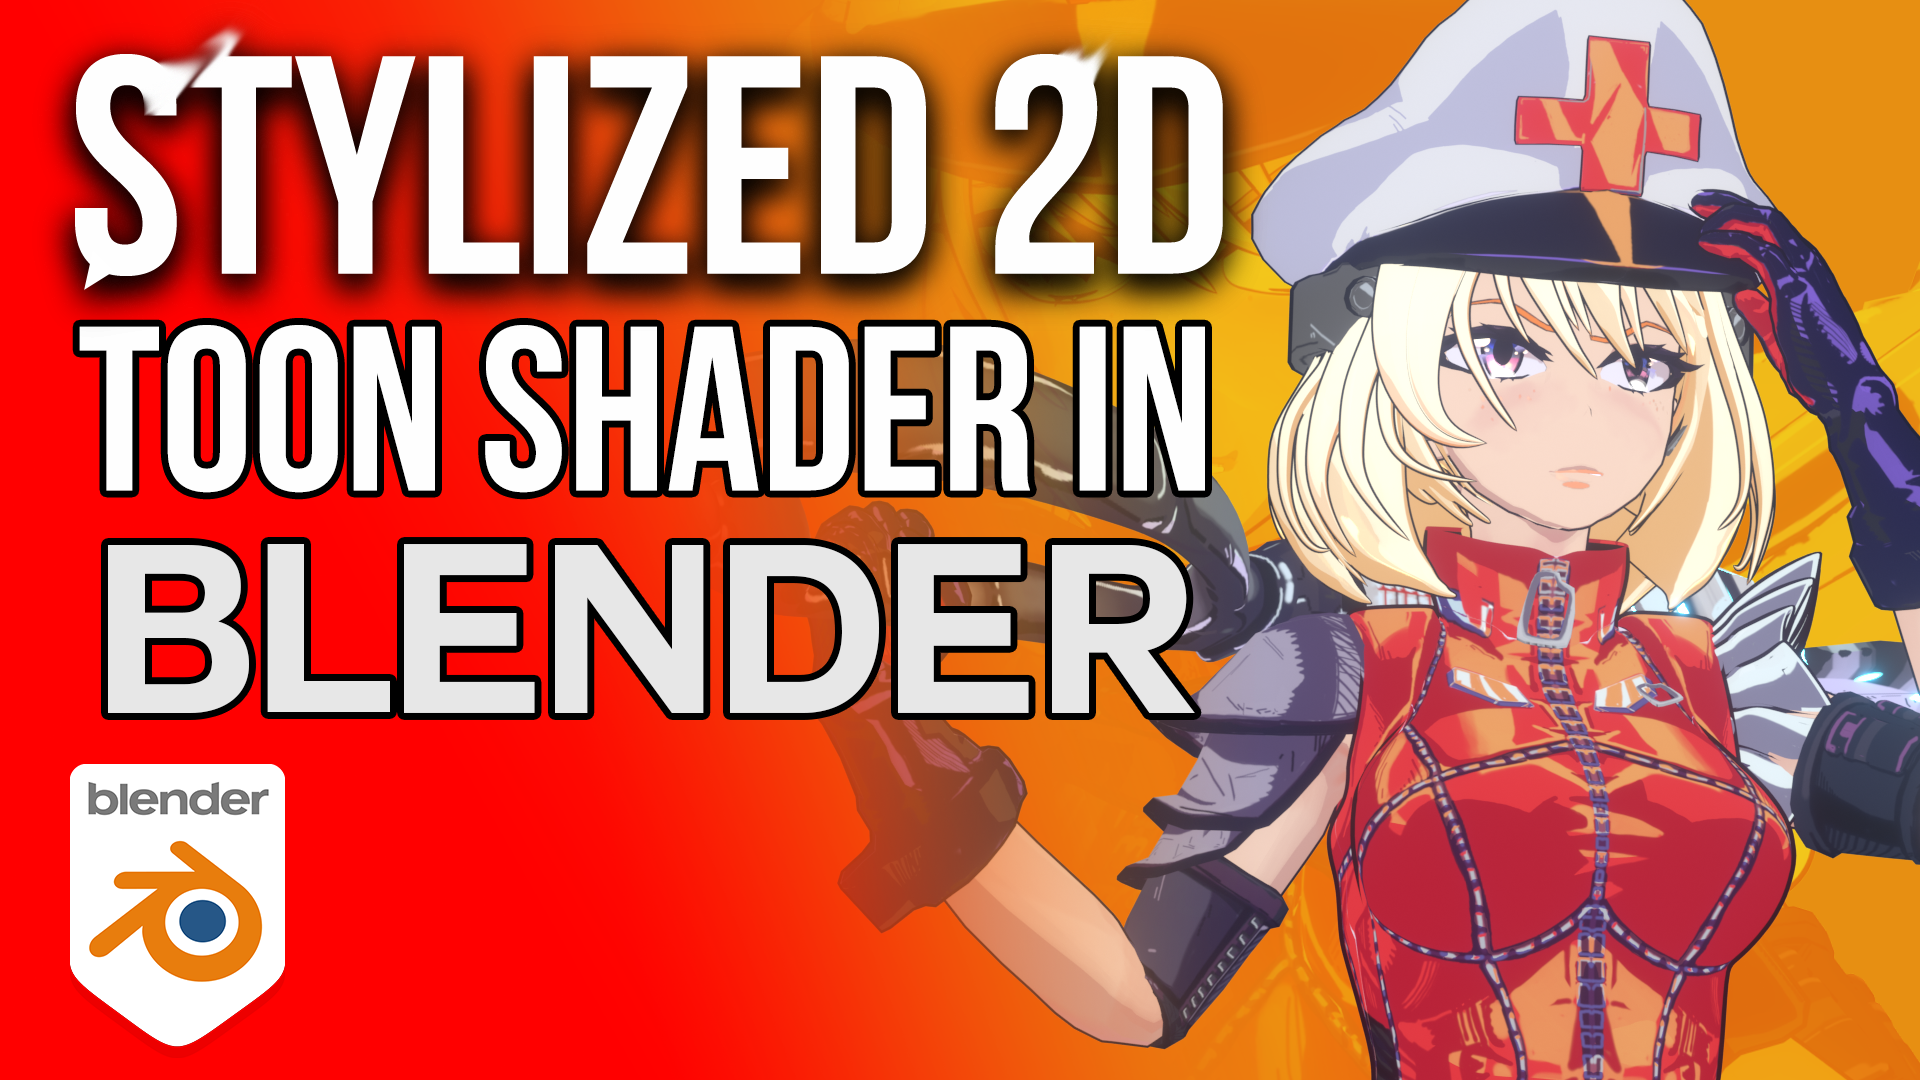 Stylized 2D Toon Shader in Blender